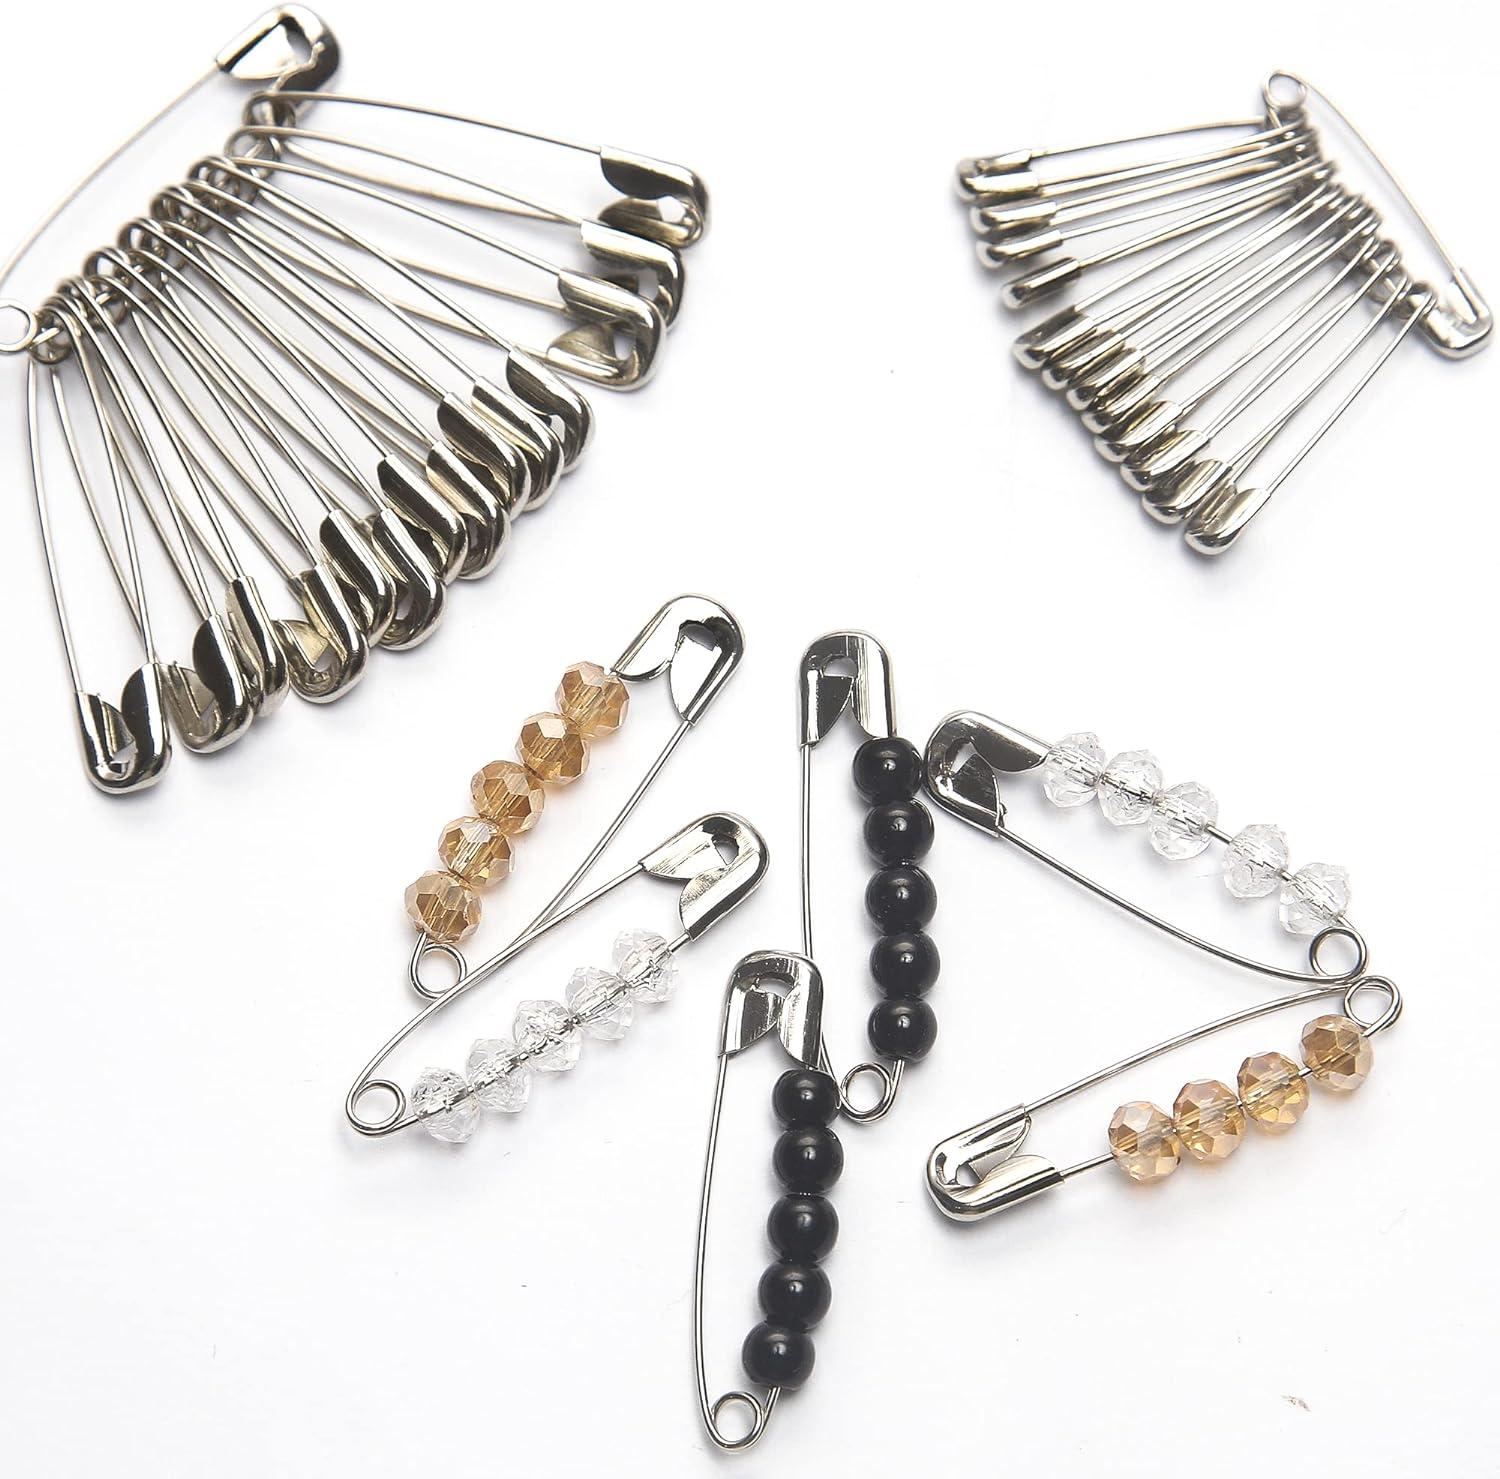 Atteched 250 Pcs Safety Pins, Small and Large Safety Pin, Strong &  Rust-Resistant Safety Pin, for Clothes, Hijab, Sliver…